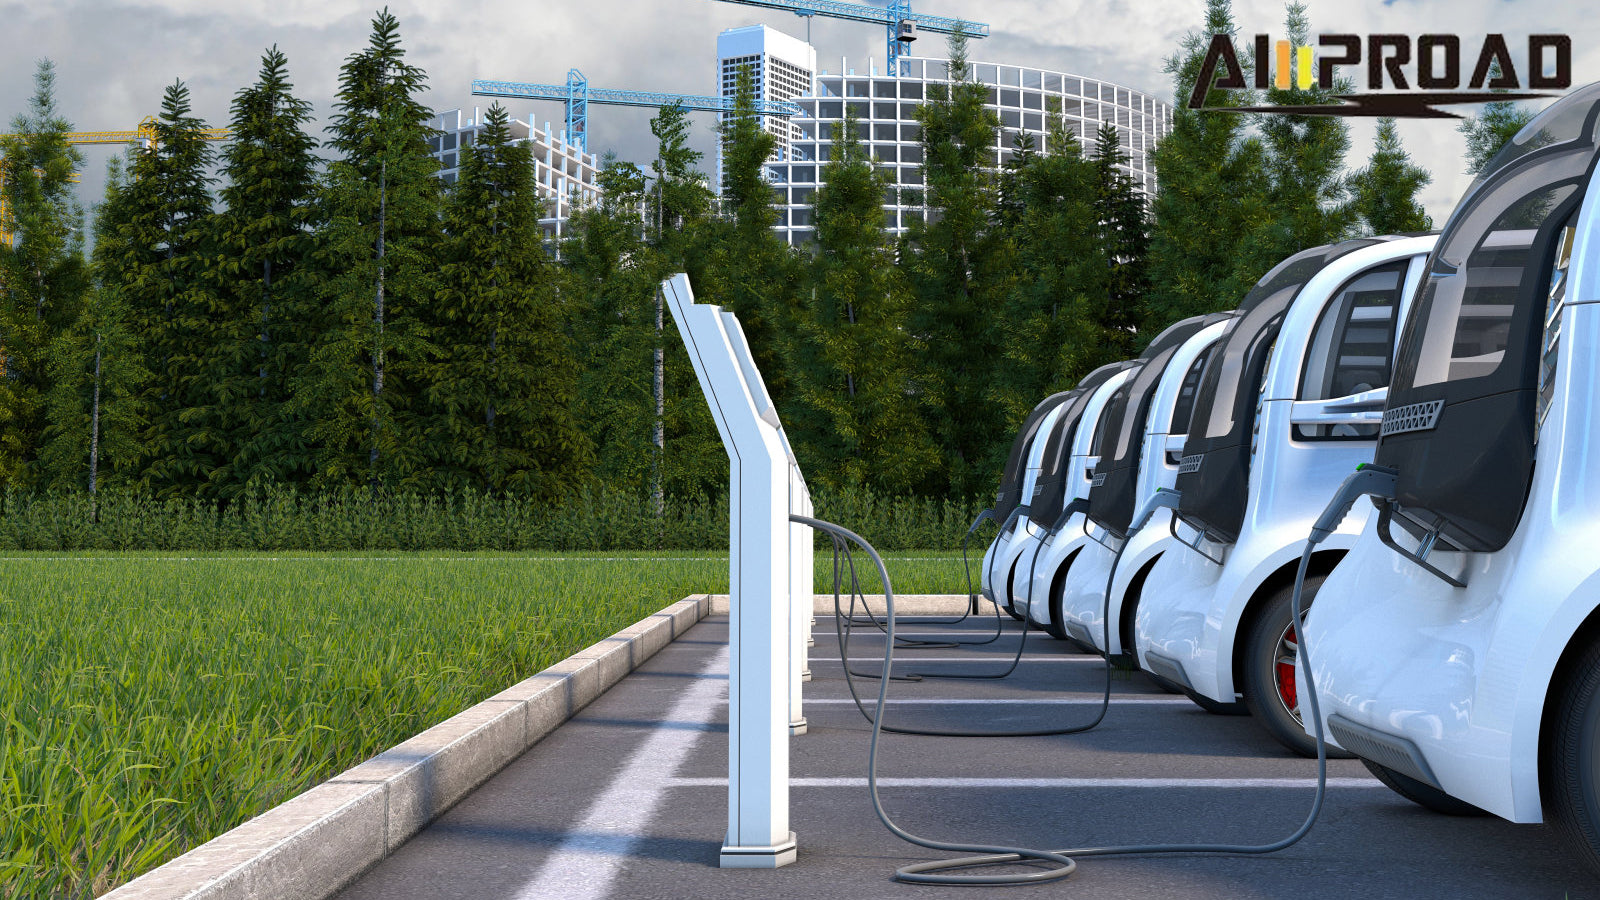 Introduction of Major Electric Vehicle Charging Companies in the US